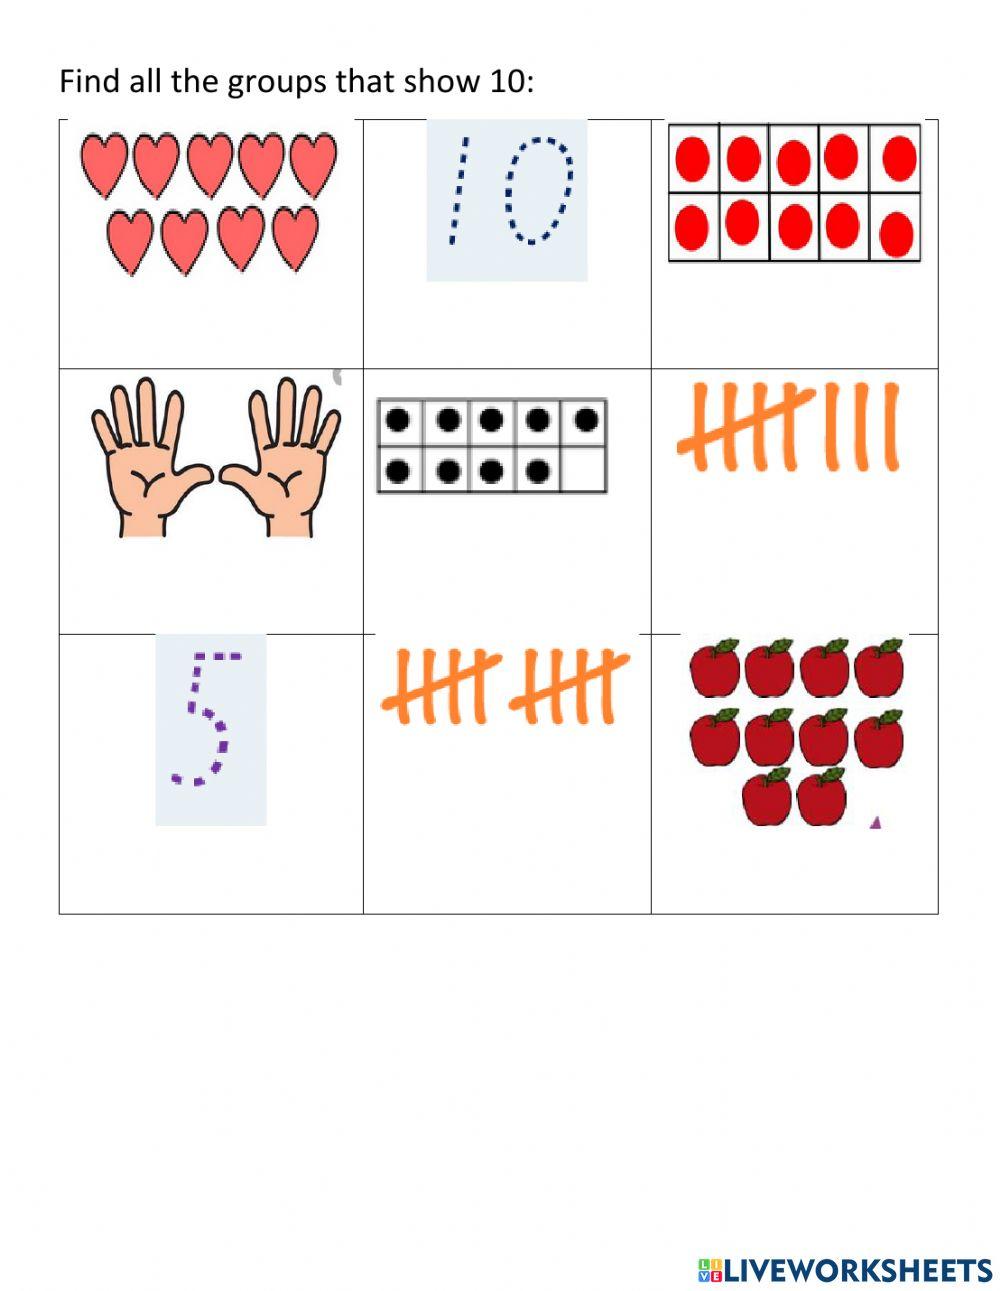 Counting 10 objects